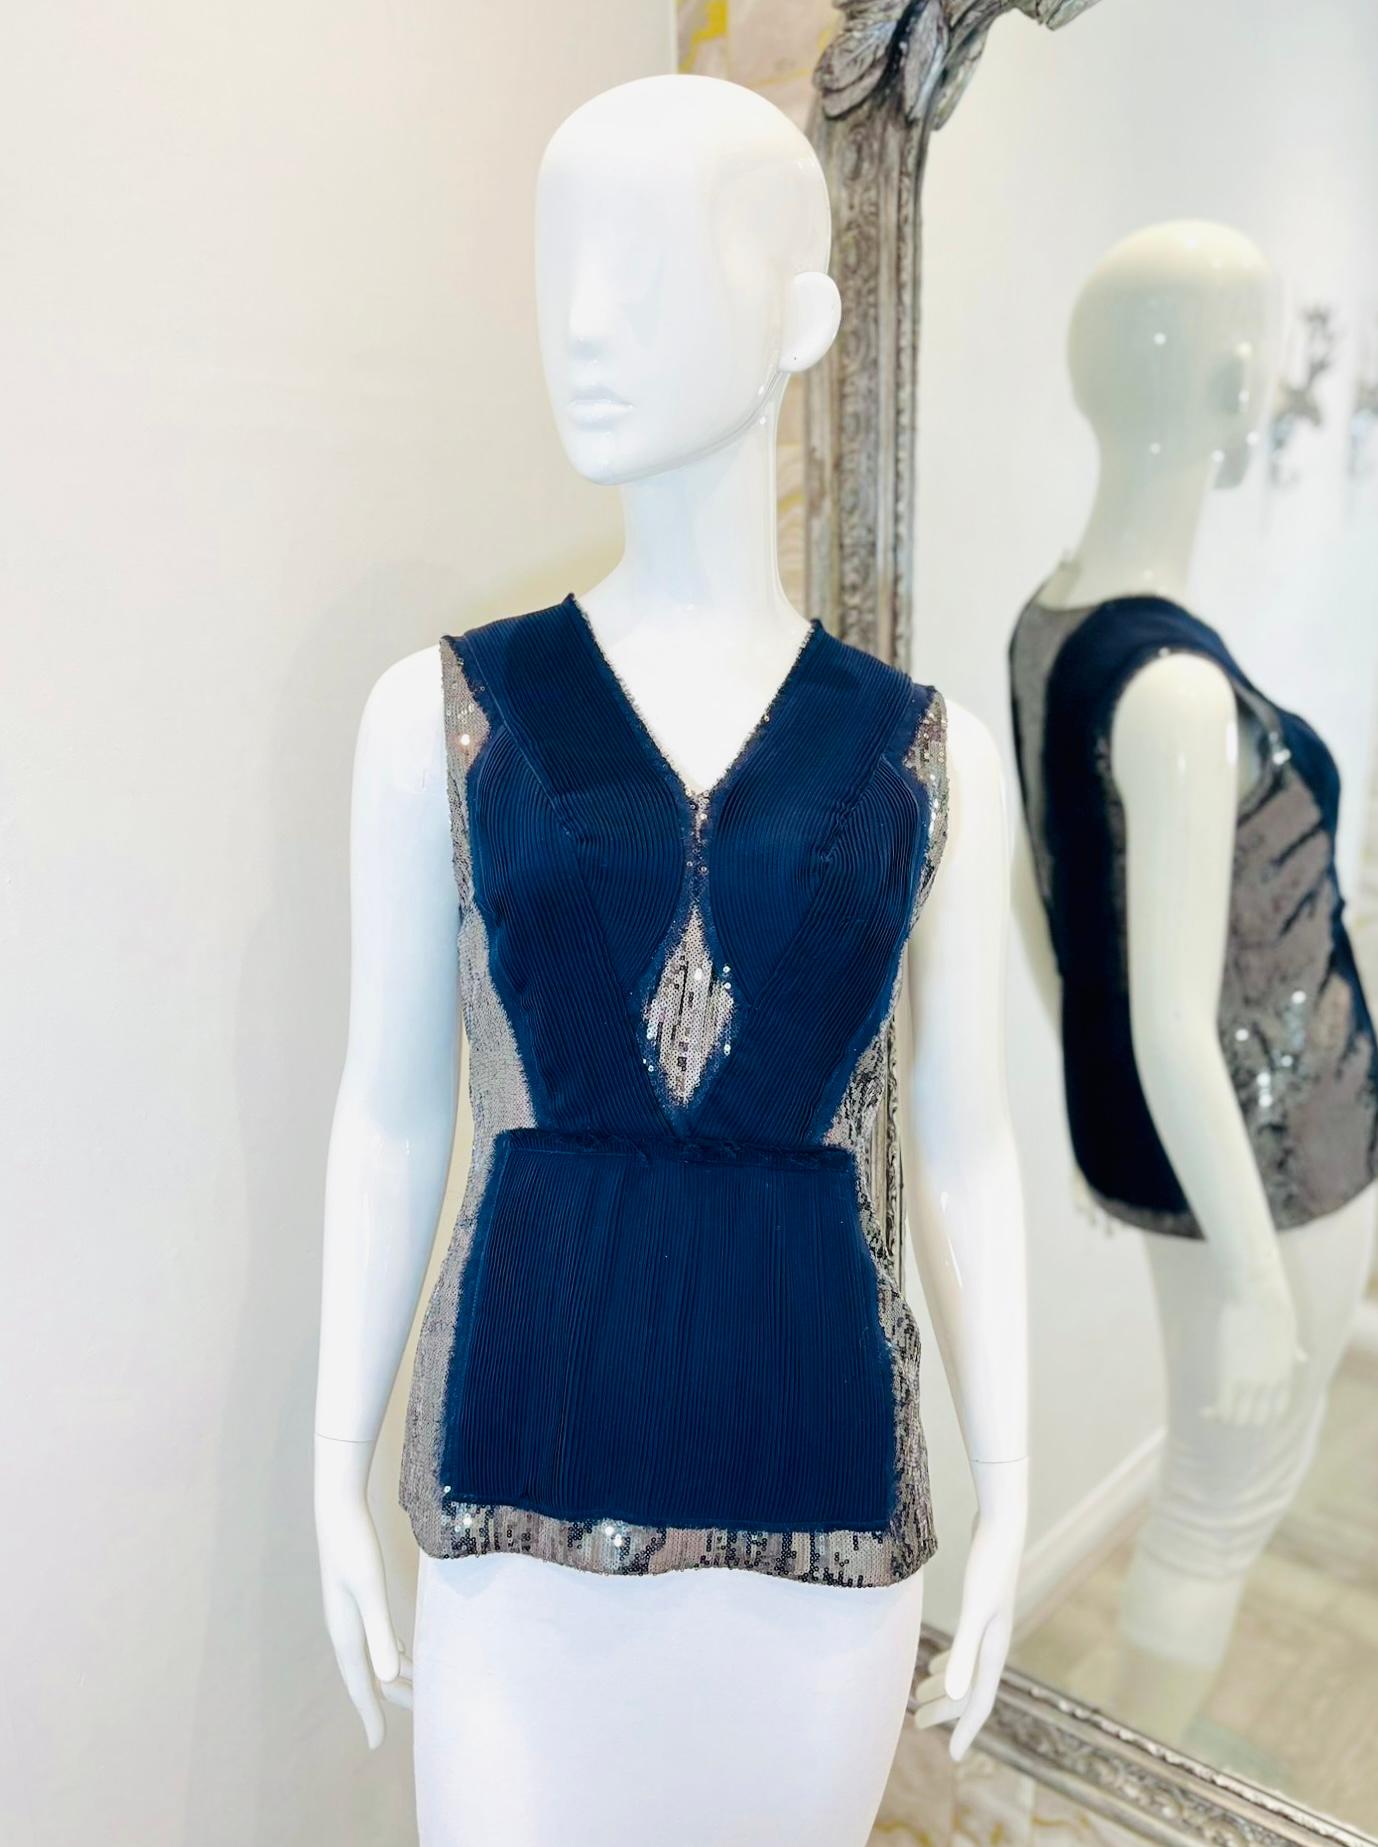 Phillip Lim Sequin Embellished Top

Navy, sleeveless top designed with textured panels and embellished with silver sequin inserts to the side, centre and rear.

Detailed with raw edges and V-Neckline.

Size – 6US

Condition – Very Good

Composition